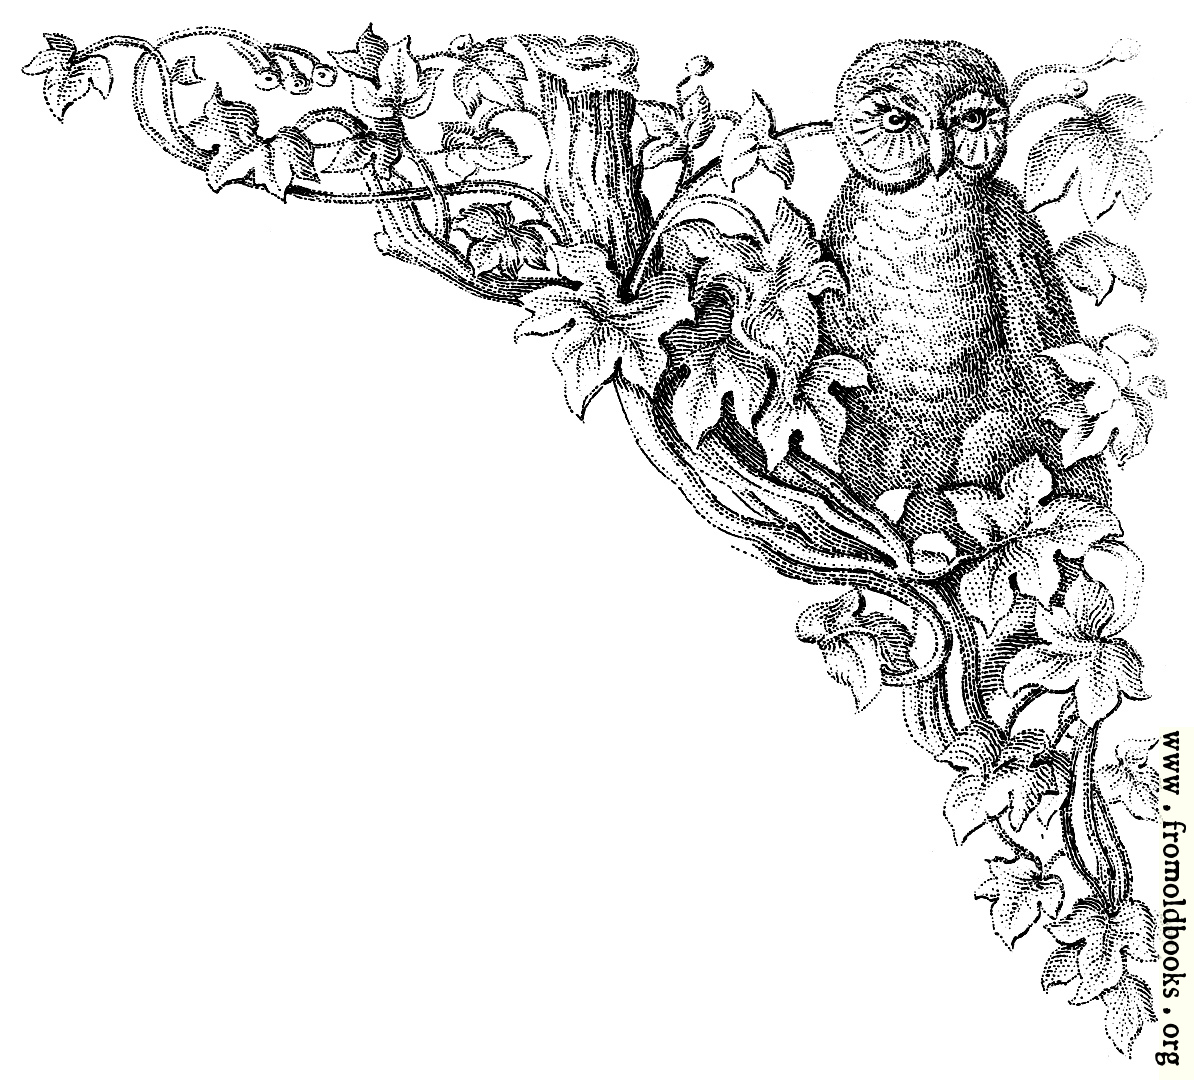 [Picture: Corner decoration: Owl with leaves and tree]